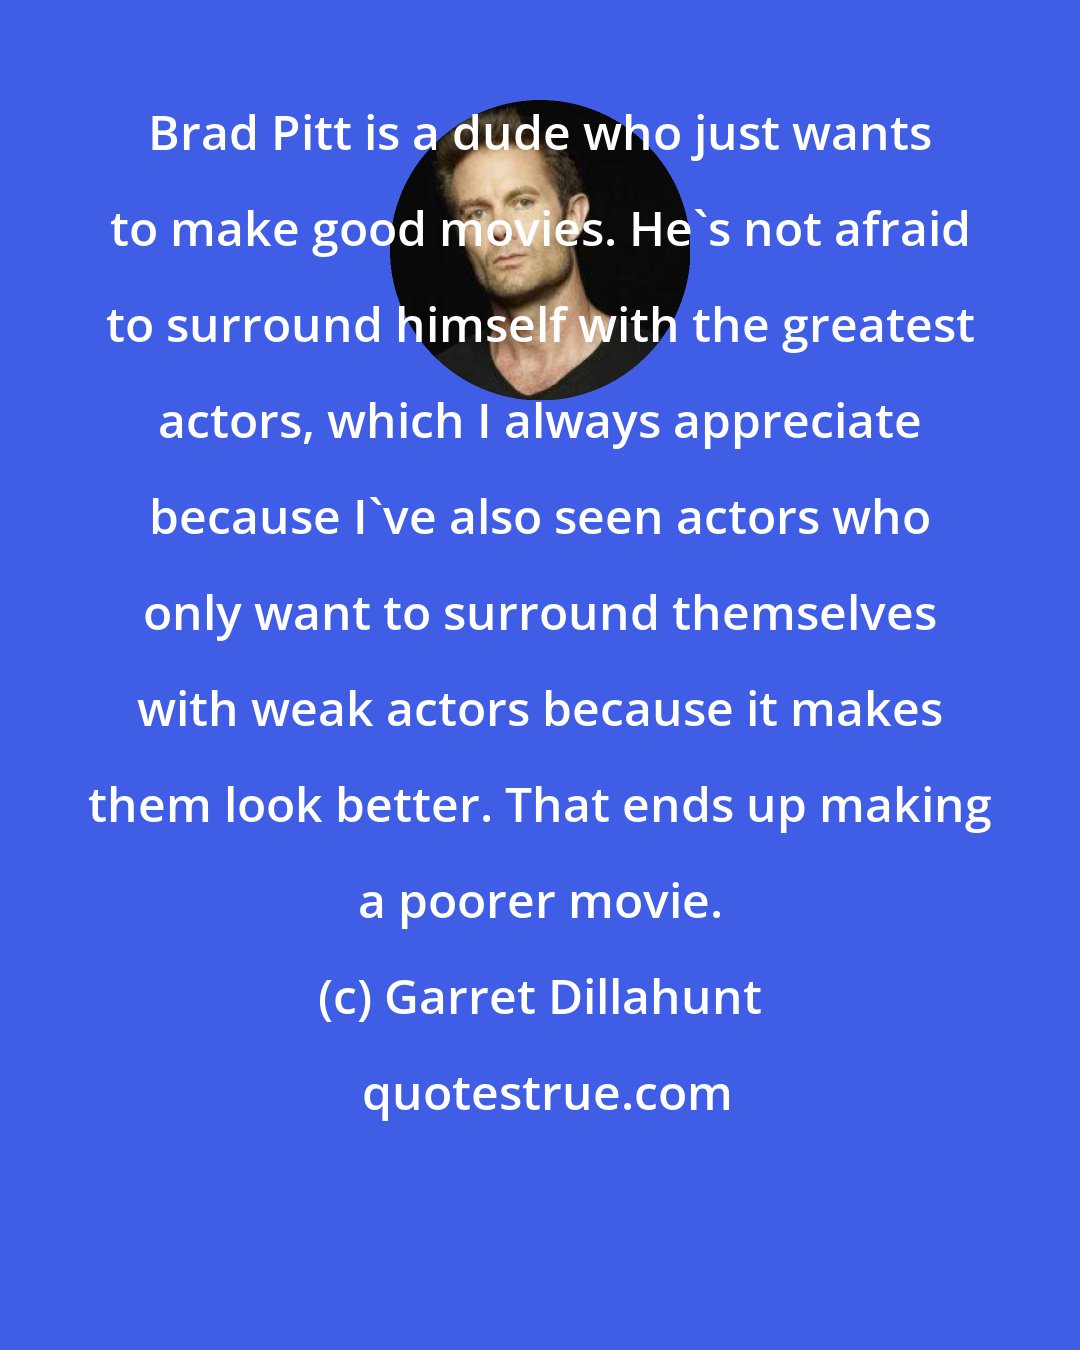 Garret Dillahunt: Brad Pitt is a dude who just wants to make good movies. He's not afraid to surround himself with the greatest actors, which I always appreciate because I've also seen actors who only want to surround themselves with weak actors because it makes them look better. That ends up making a poorer movie.